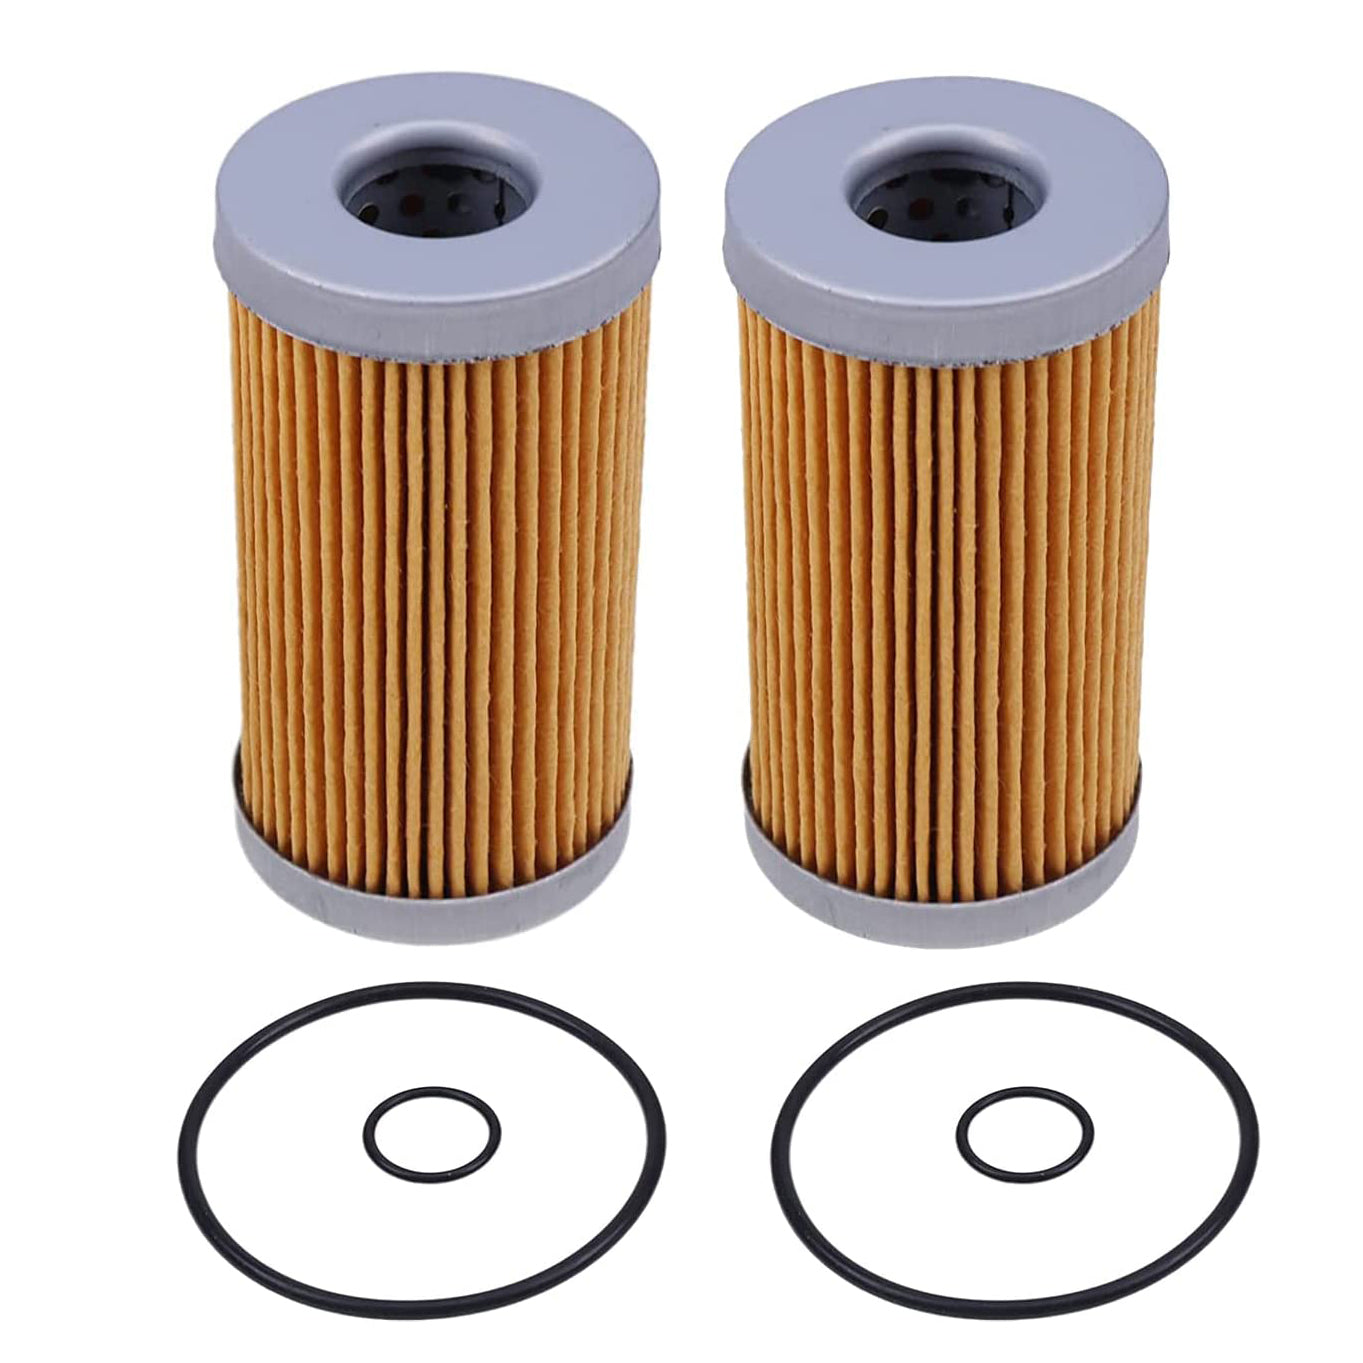 New 2X Fuel Filter W/O-ring Compatible with Case IH 234 234H 235 244 245 254 255 265 275